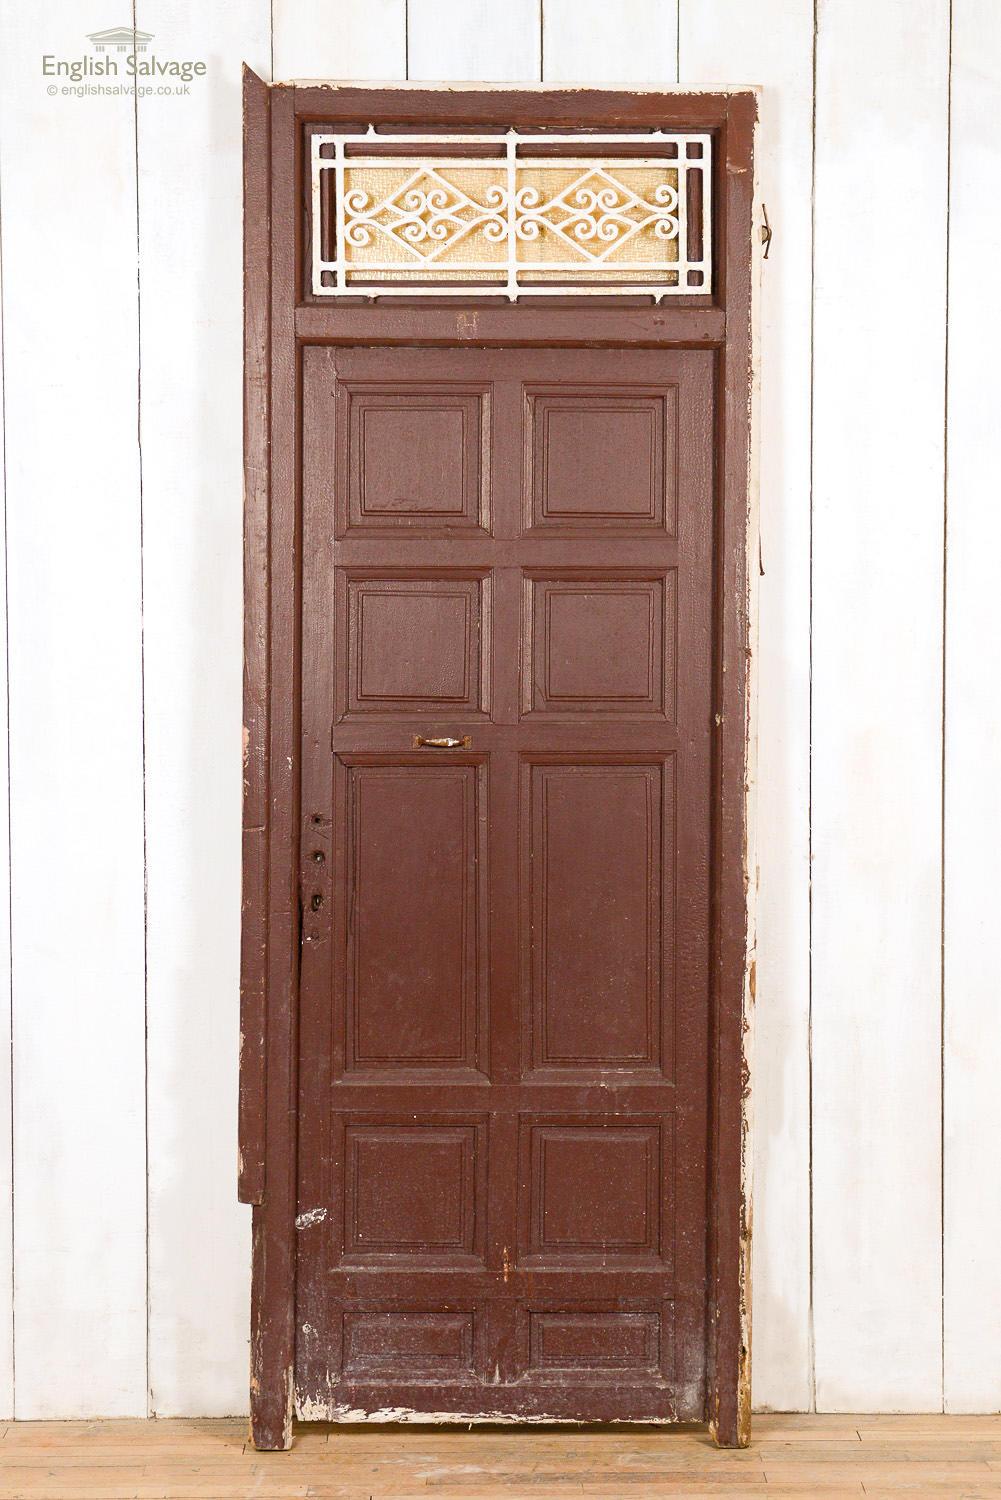 Reclaimed soft wood door with ten fielded panels and a frame with metal grille. Overall size below, the door itself is 73cm wide x 186cm high. Wear and tear plus handle, lock and nail holes present.